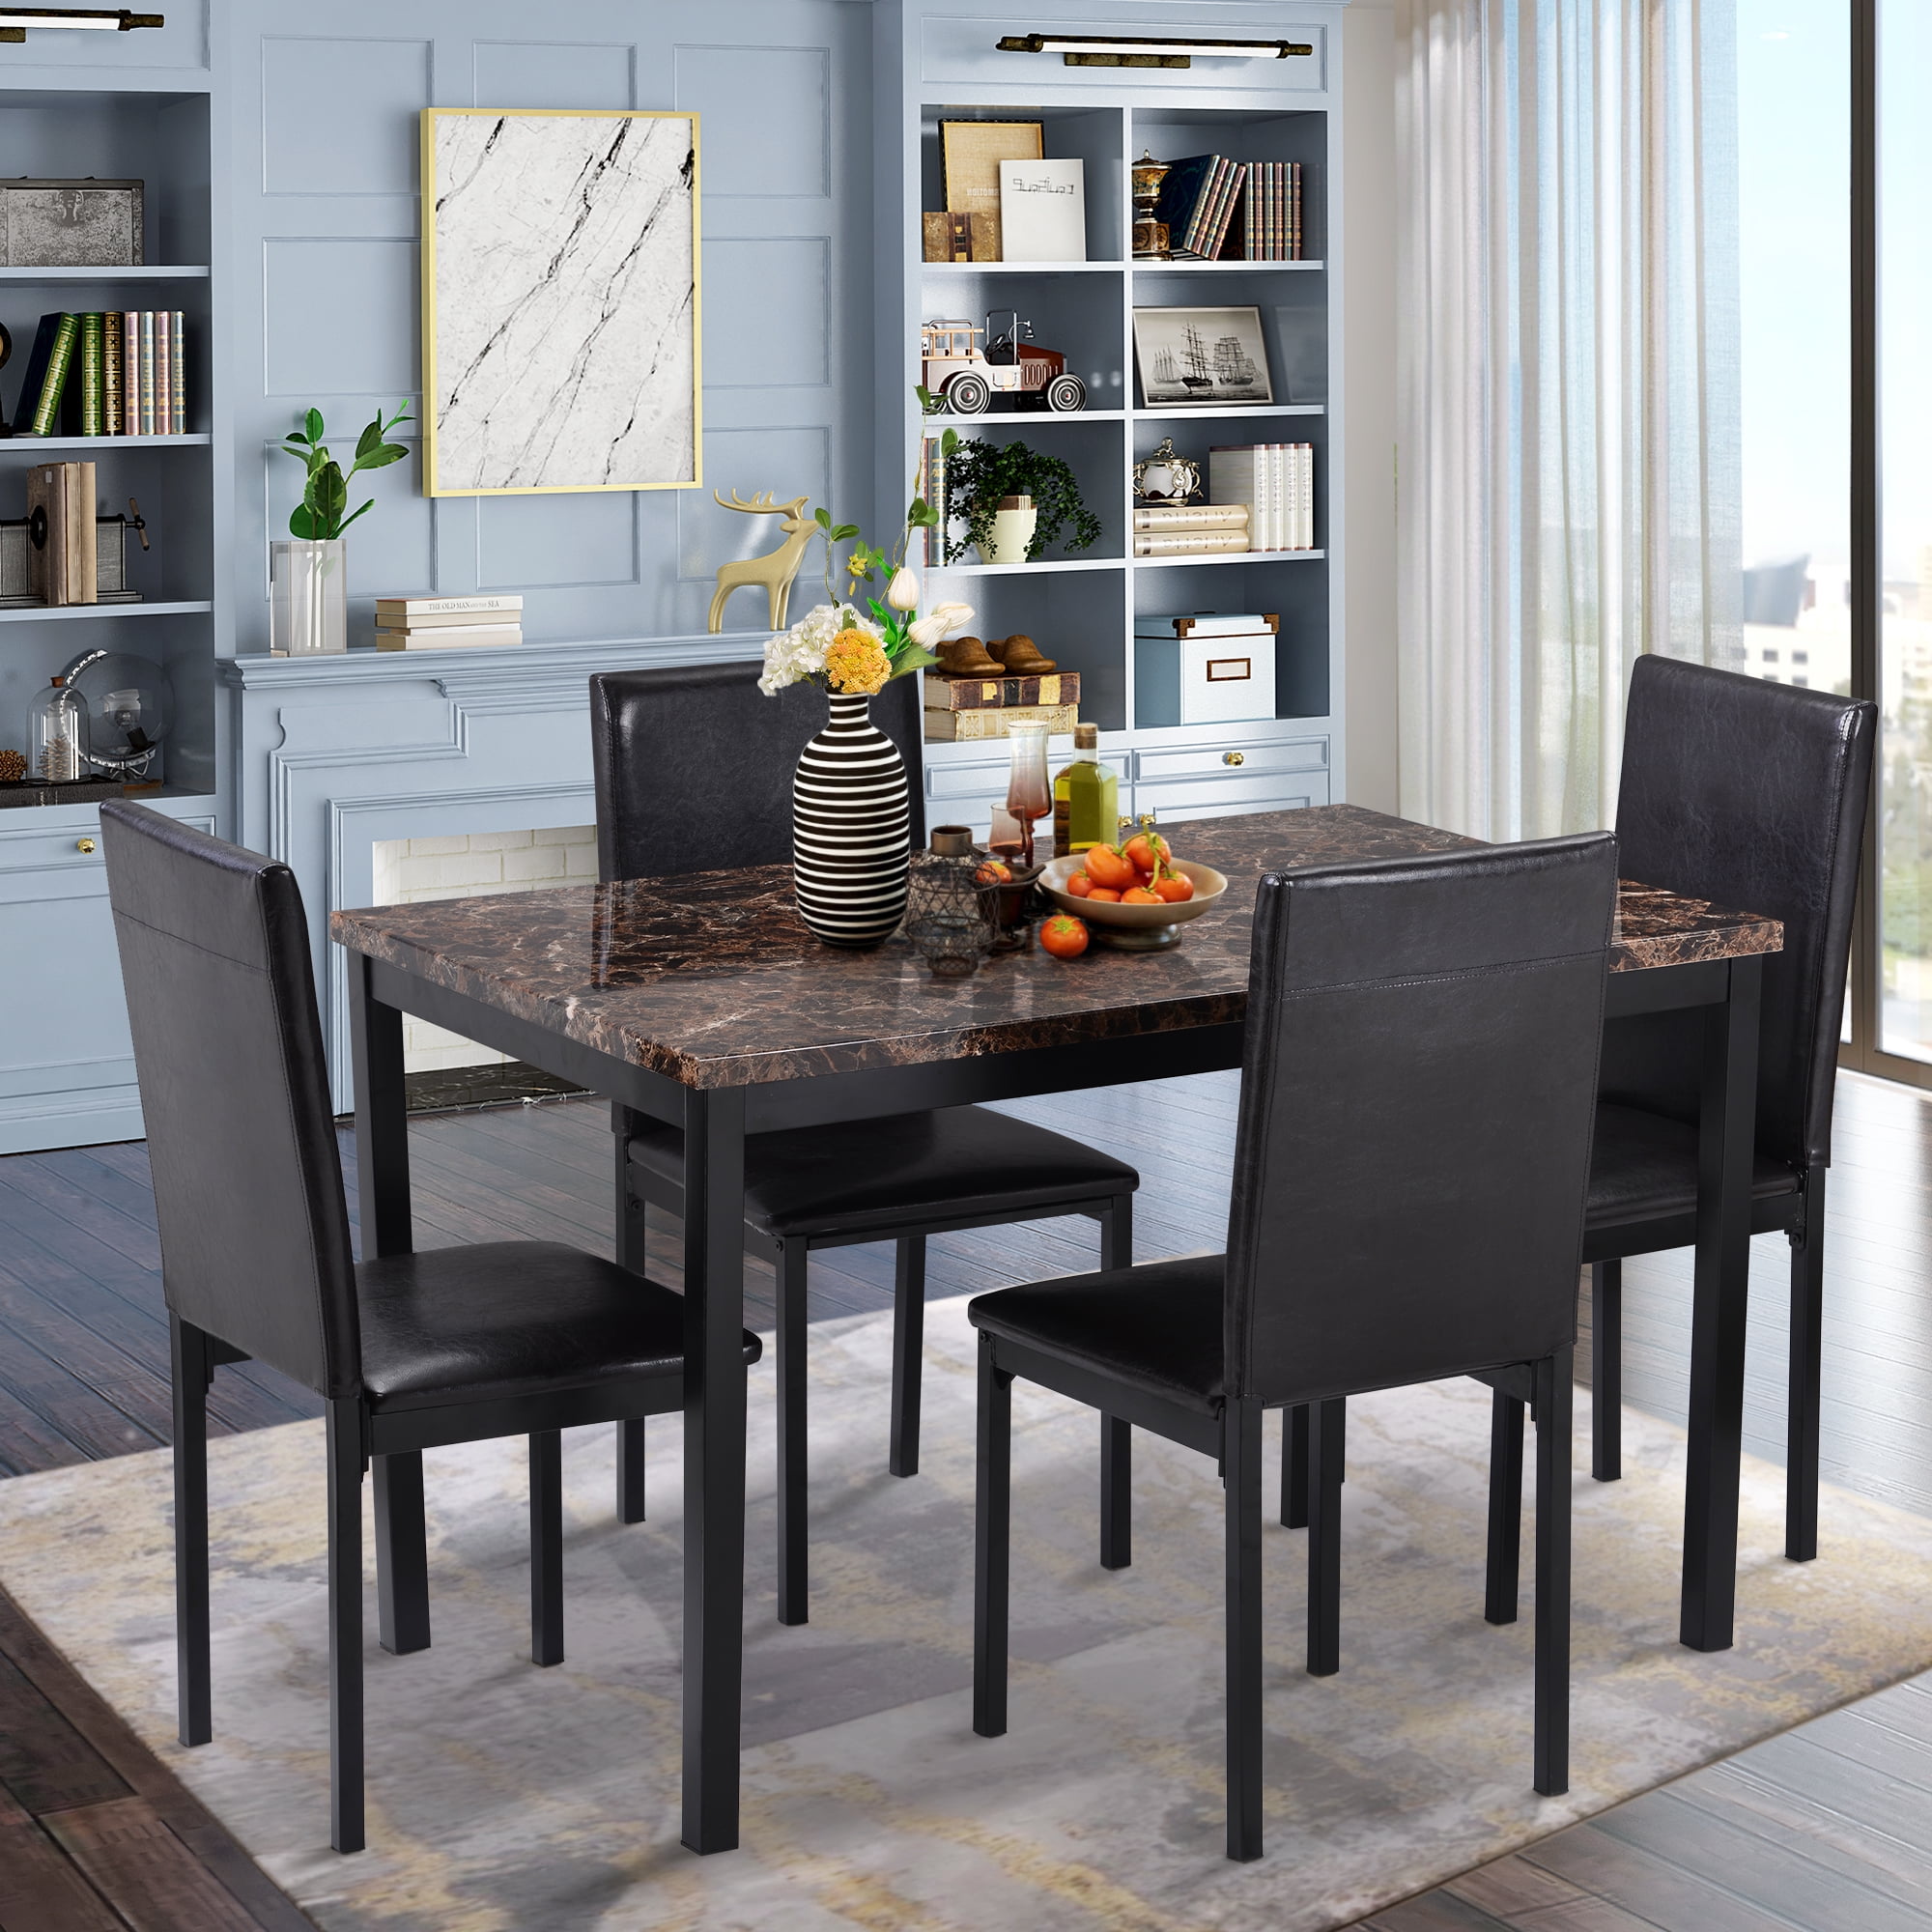 Black Dining Table Set For 4 Persons 5, Black Dining Room Table Set